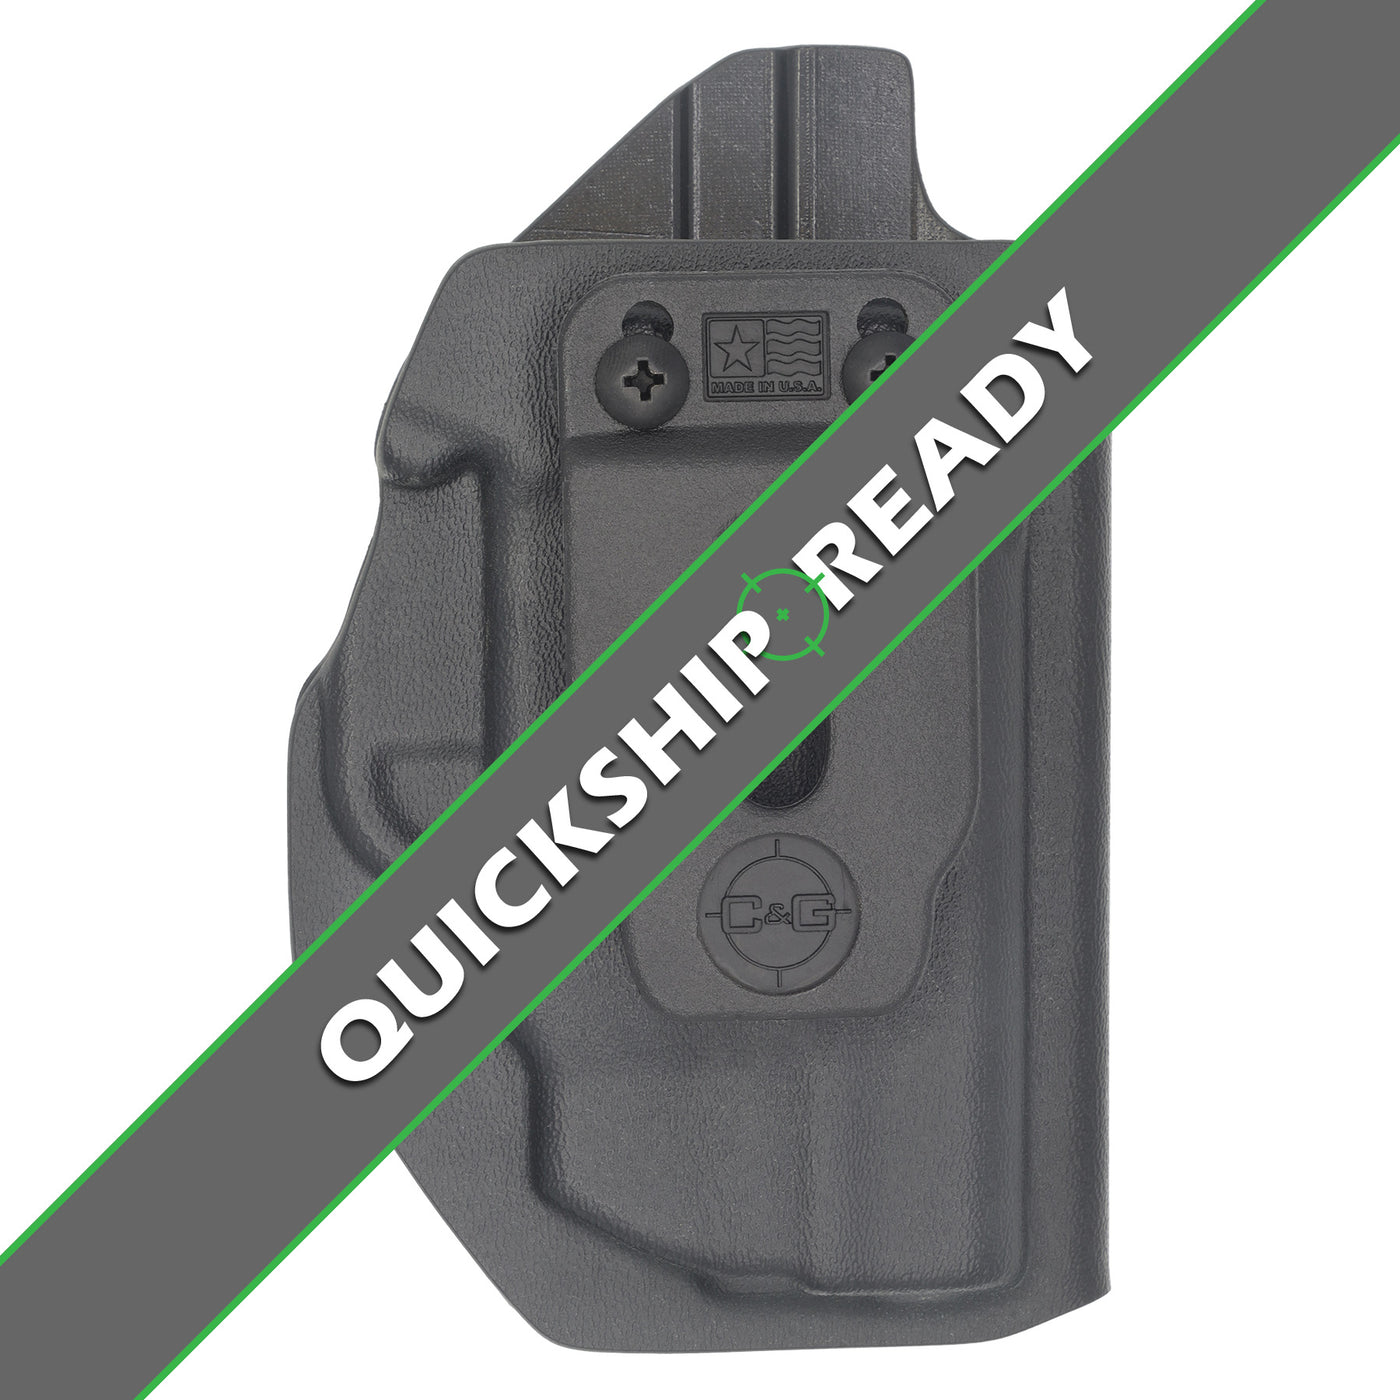 C&G Holsters quickship IWB inside the waistband Tactical Holster for the M&P Shield with Laser